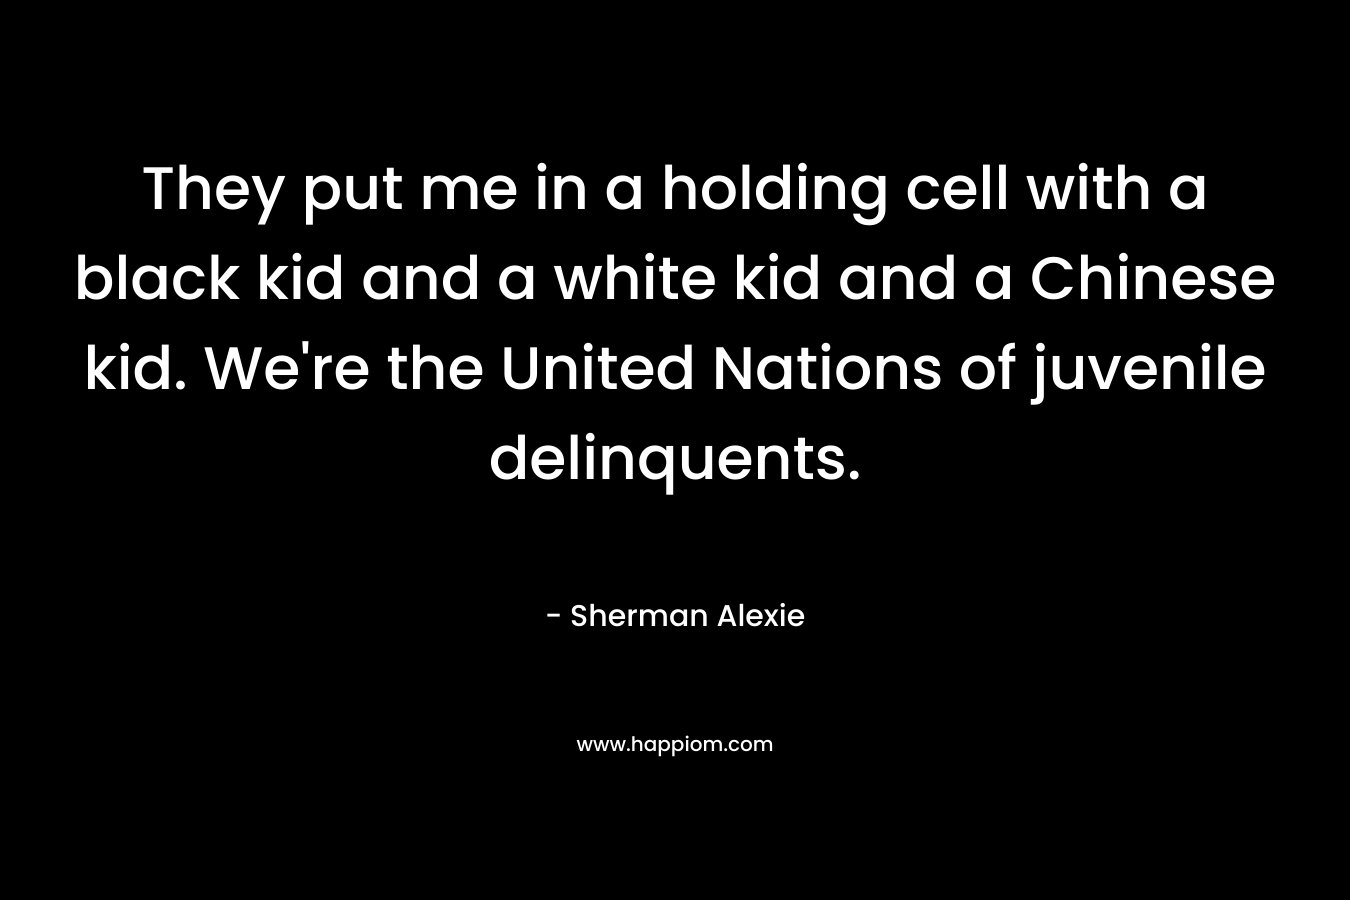 They put me in a holding cell with a black kid and a white kid and a Chinese kid. We’re the United Nations of juvenile delinquents. – Sherman Alexie